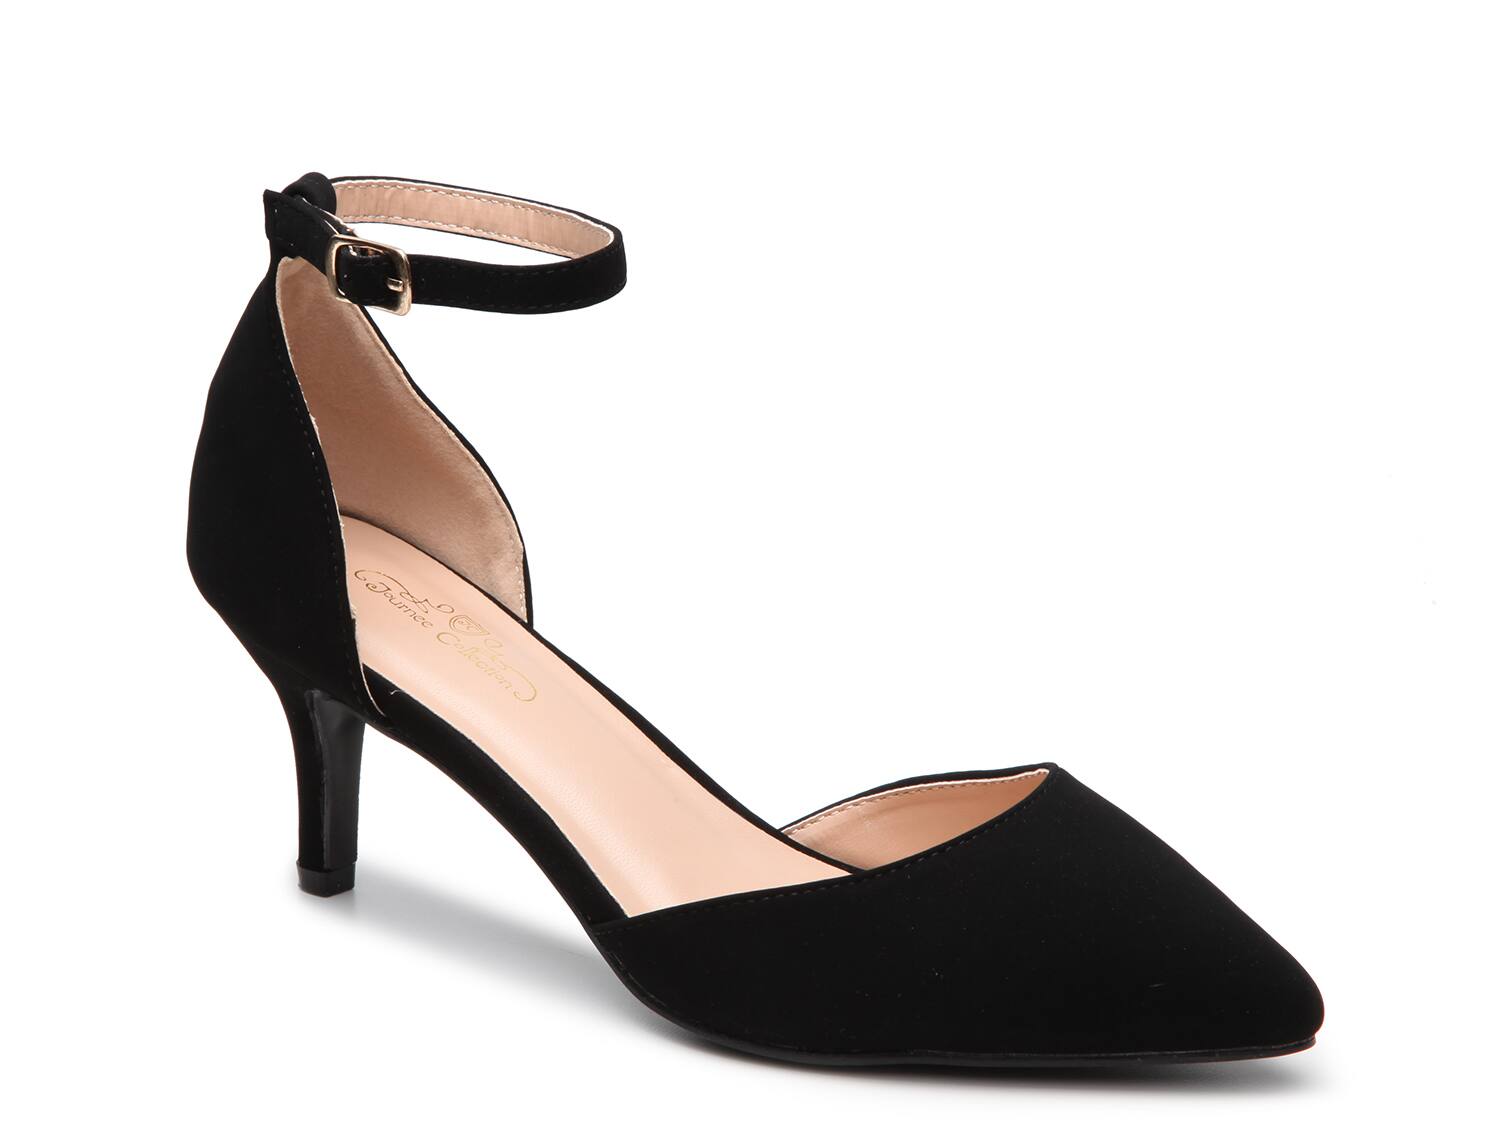 Journee Collection Ike Pump - Free Shipping | DSW